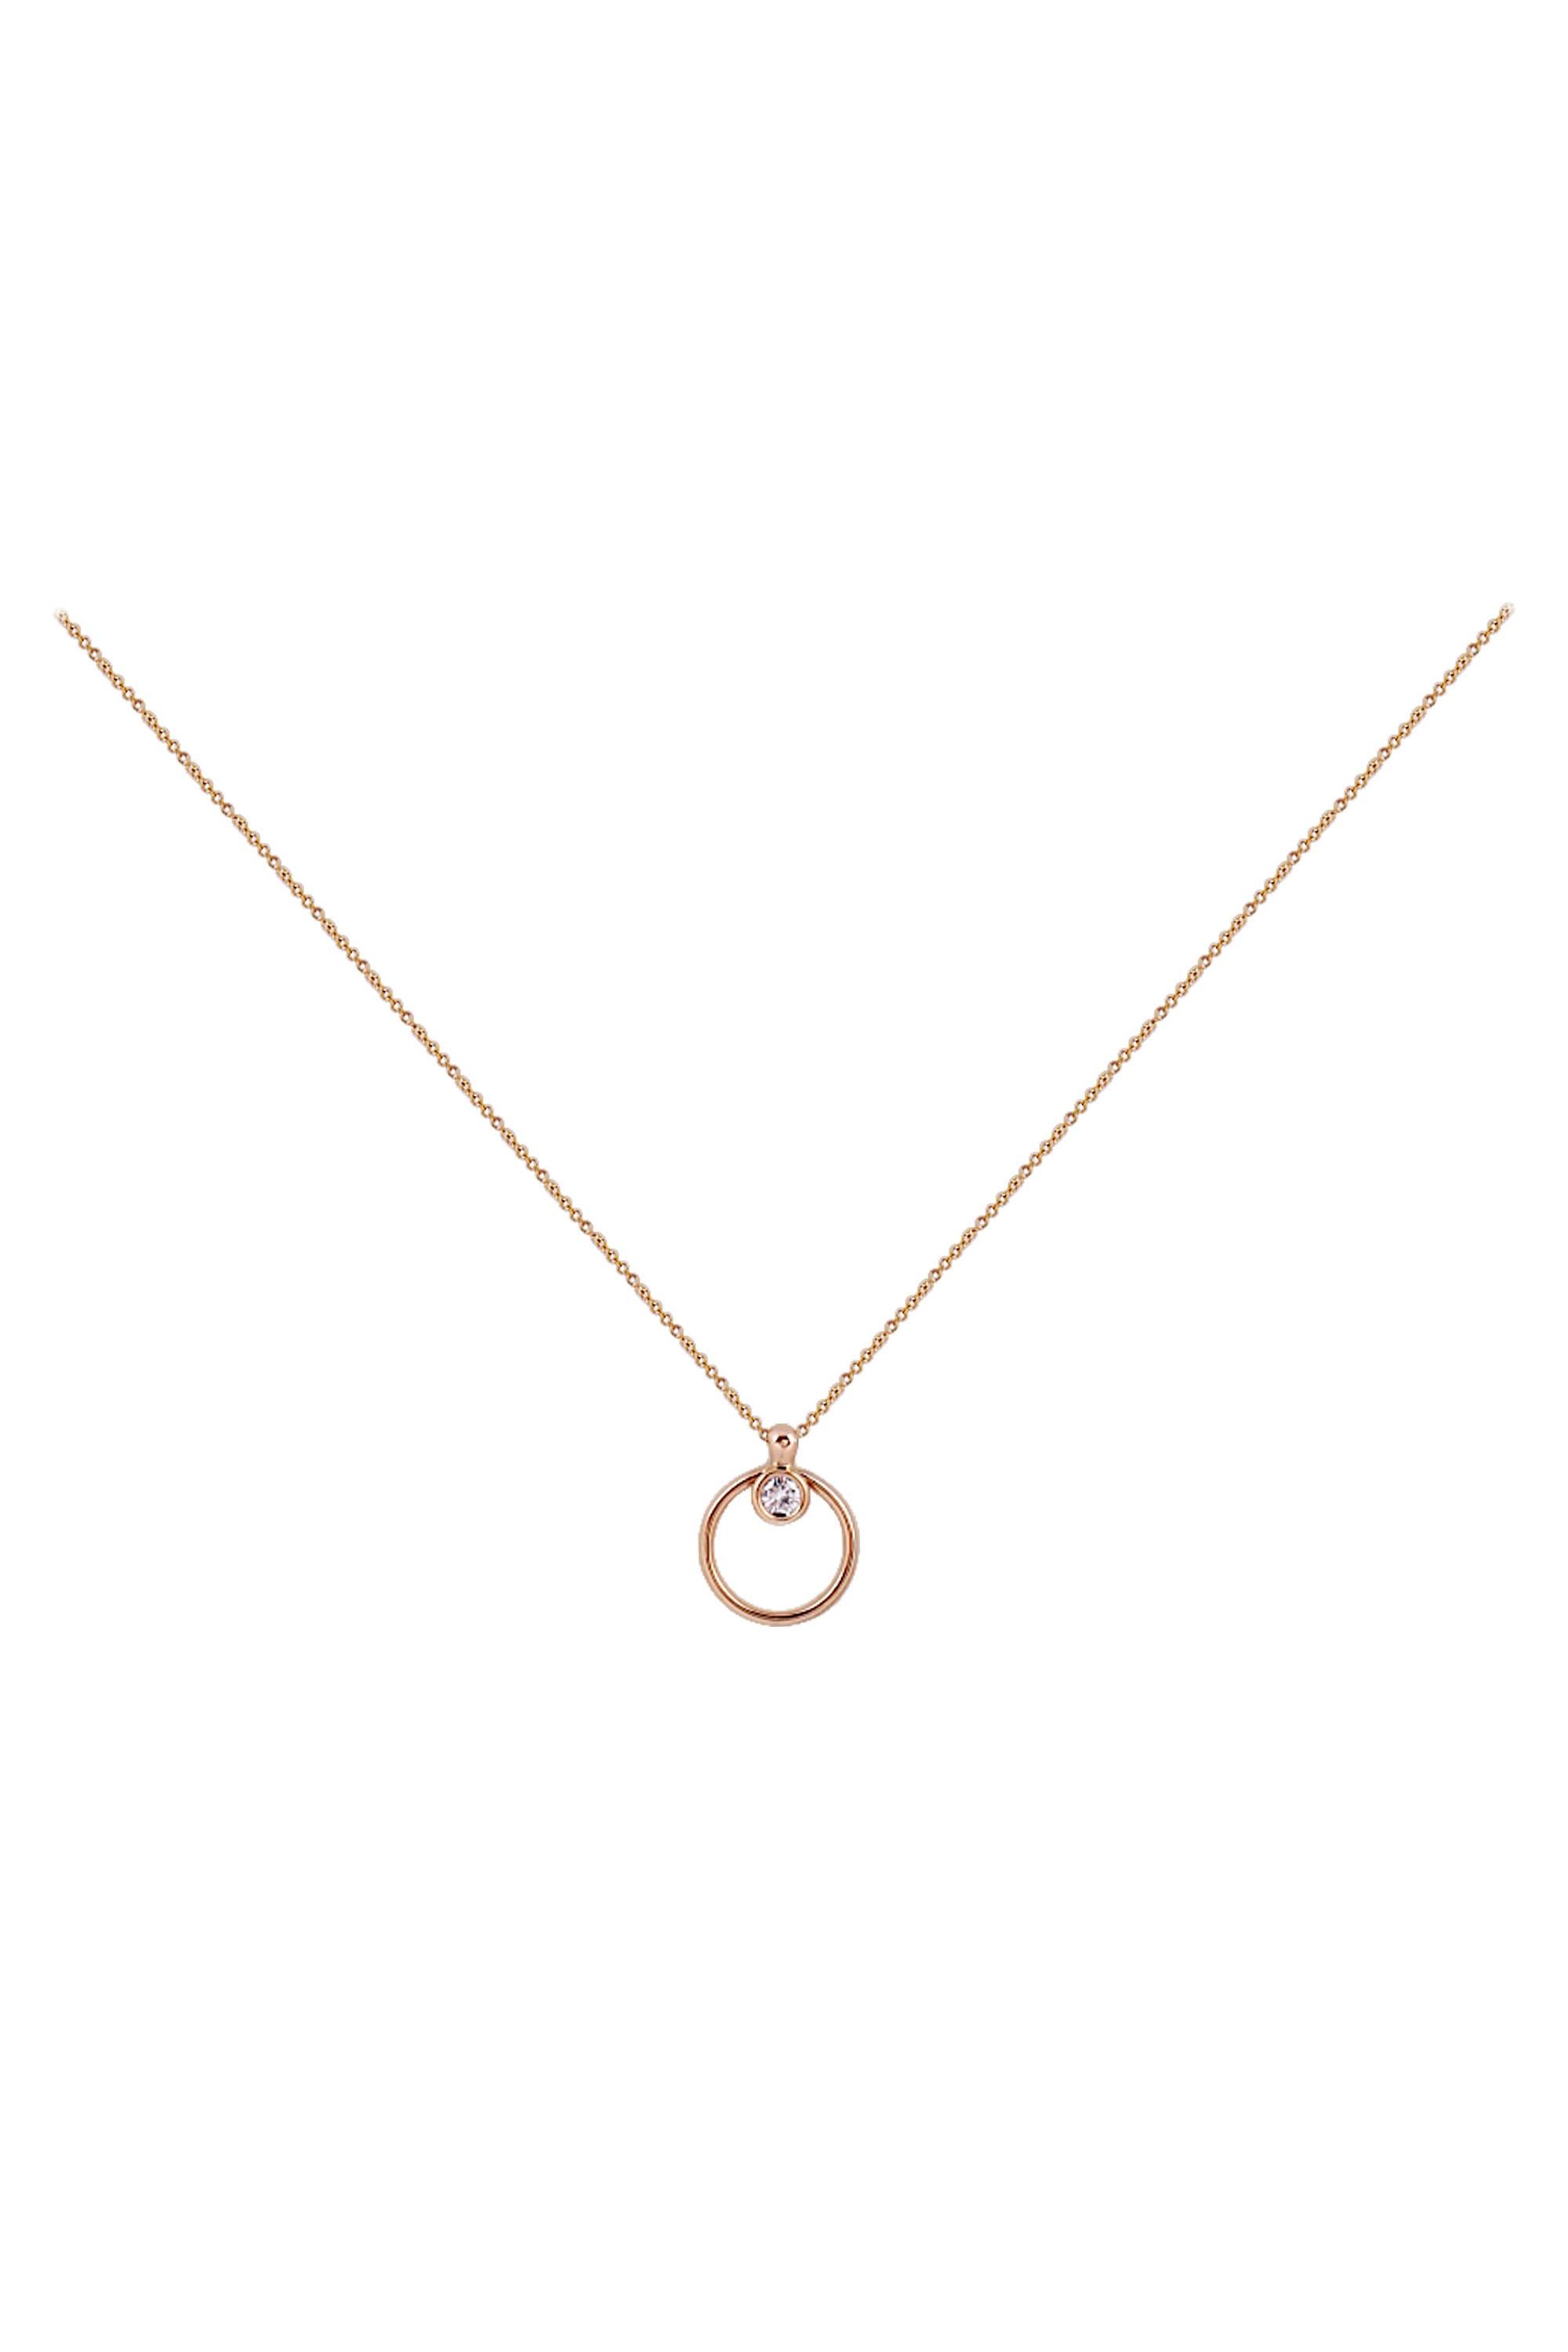 Designed and handcrafted by Nari Fine Jewels, Beverly Hills. 
Minimalist and modern, this gold circle necklace will add a fashion-forward look to your everyday wear. This open circle pendant necklace is a true classic design with a modern twist.